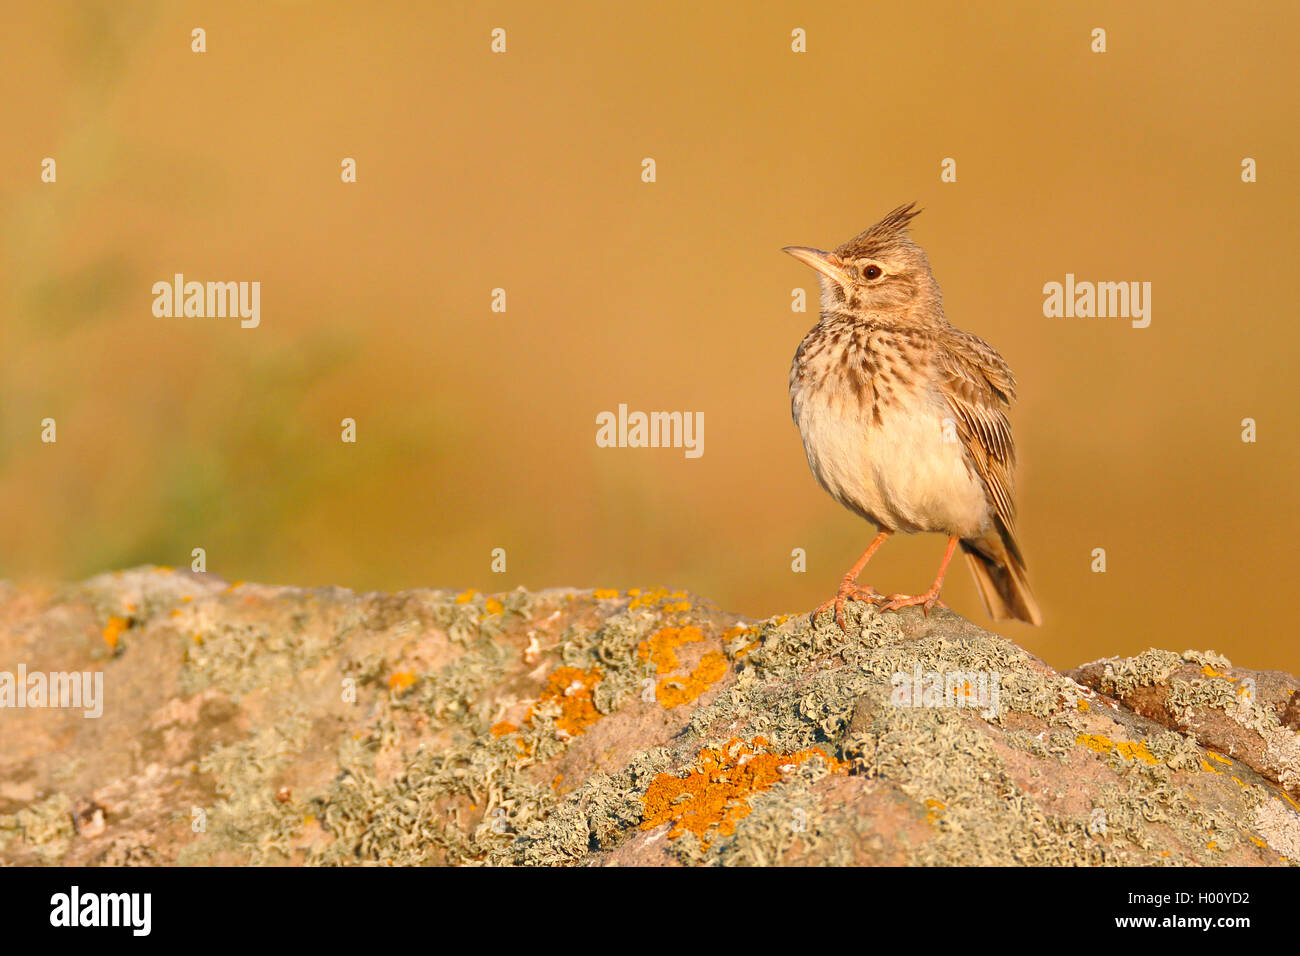 crested lark (Galerida cristata), on a lichened stone, side view, Greece, Lesbos Stock Photo